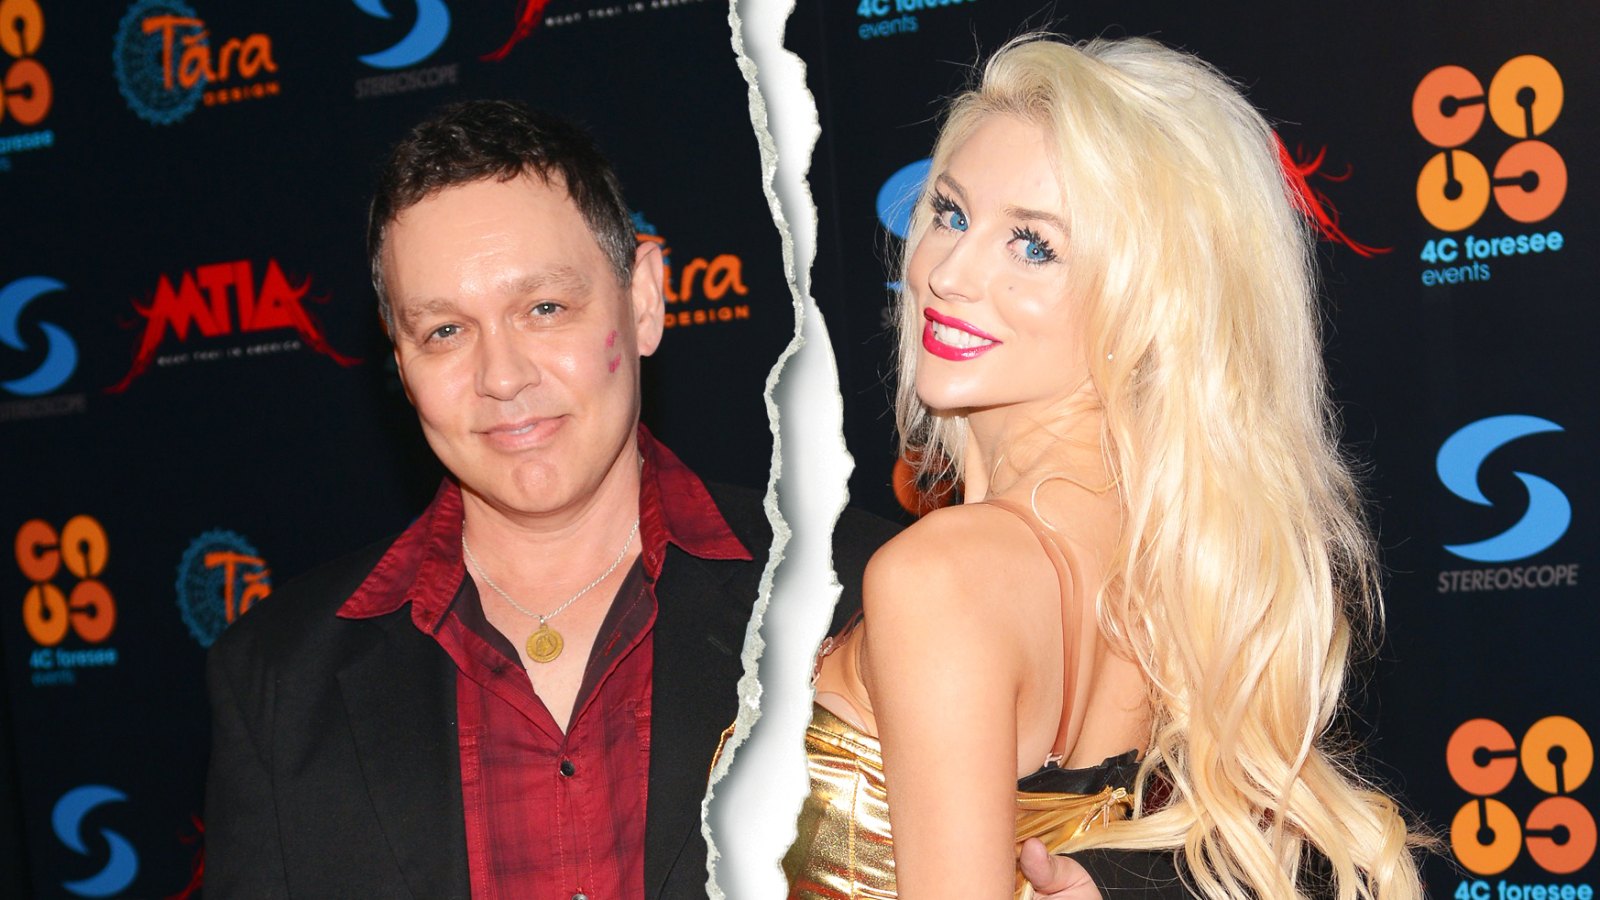 Courtney Stodden Files for Divorce From Doug Hutchison